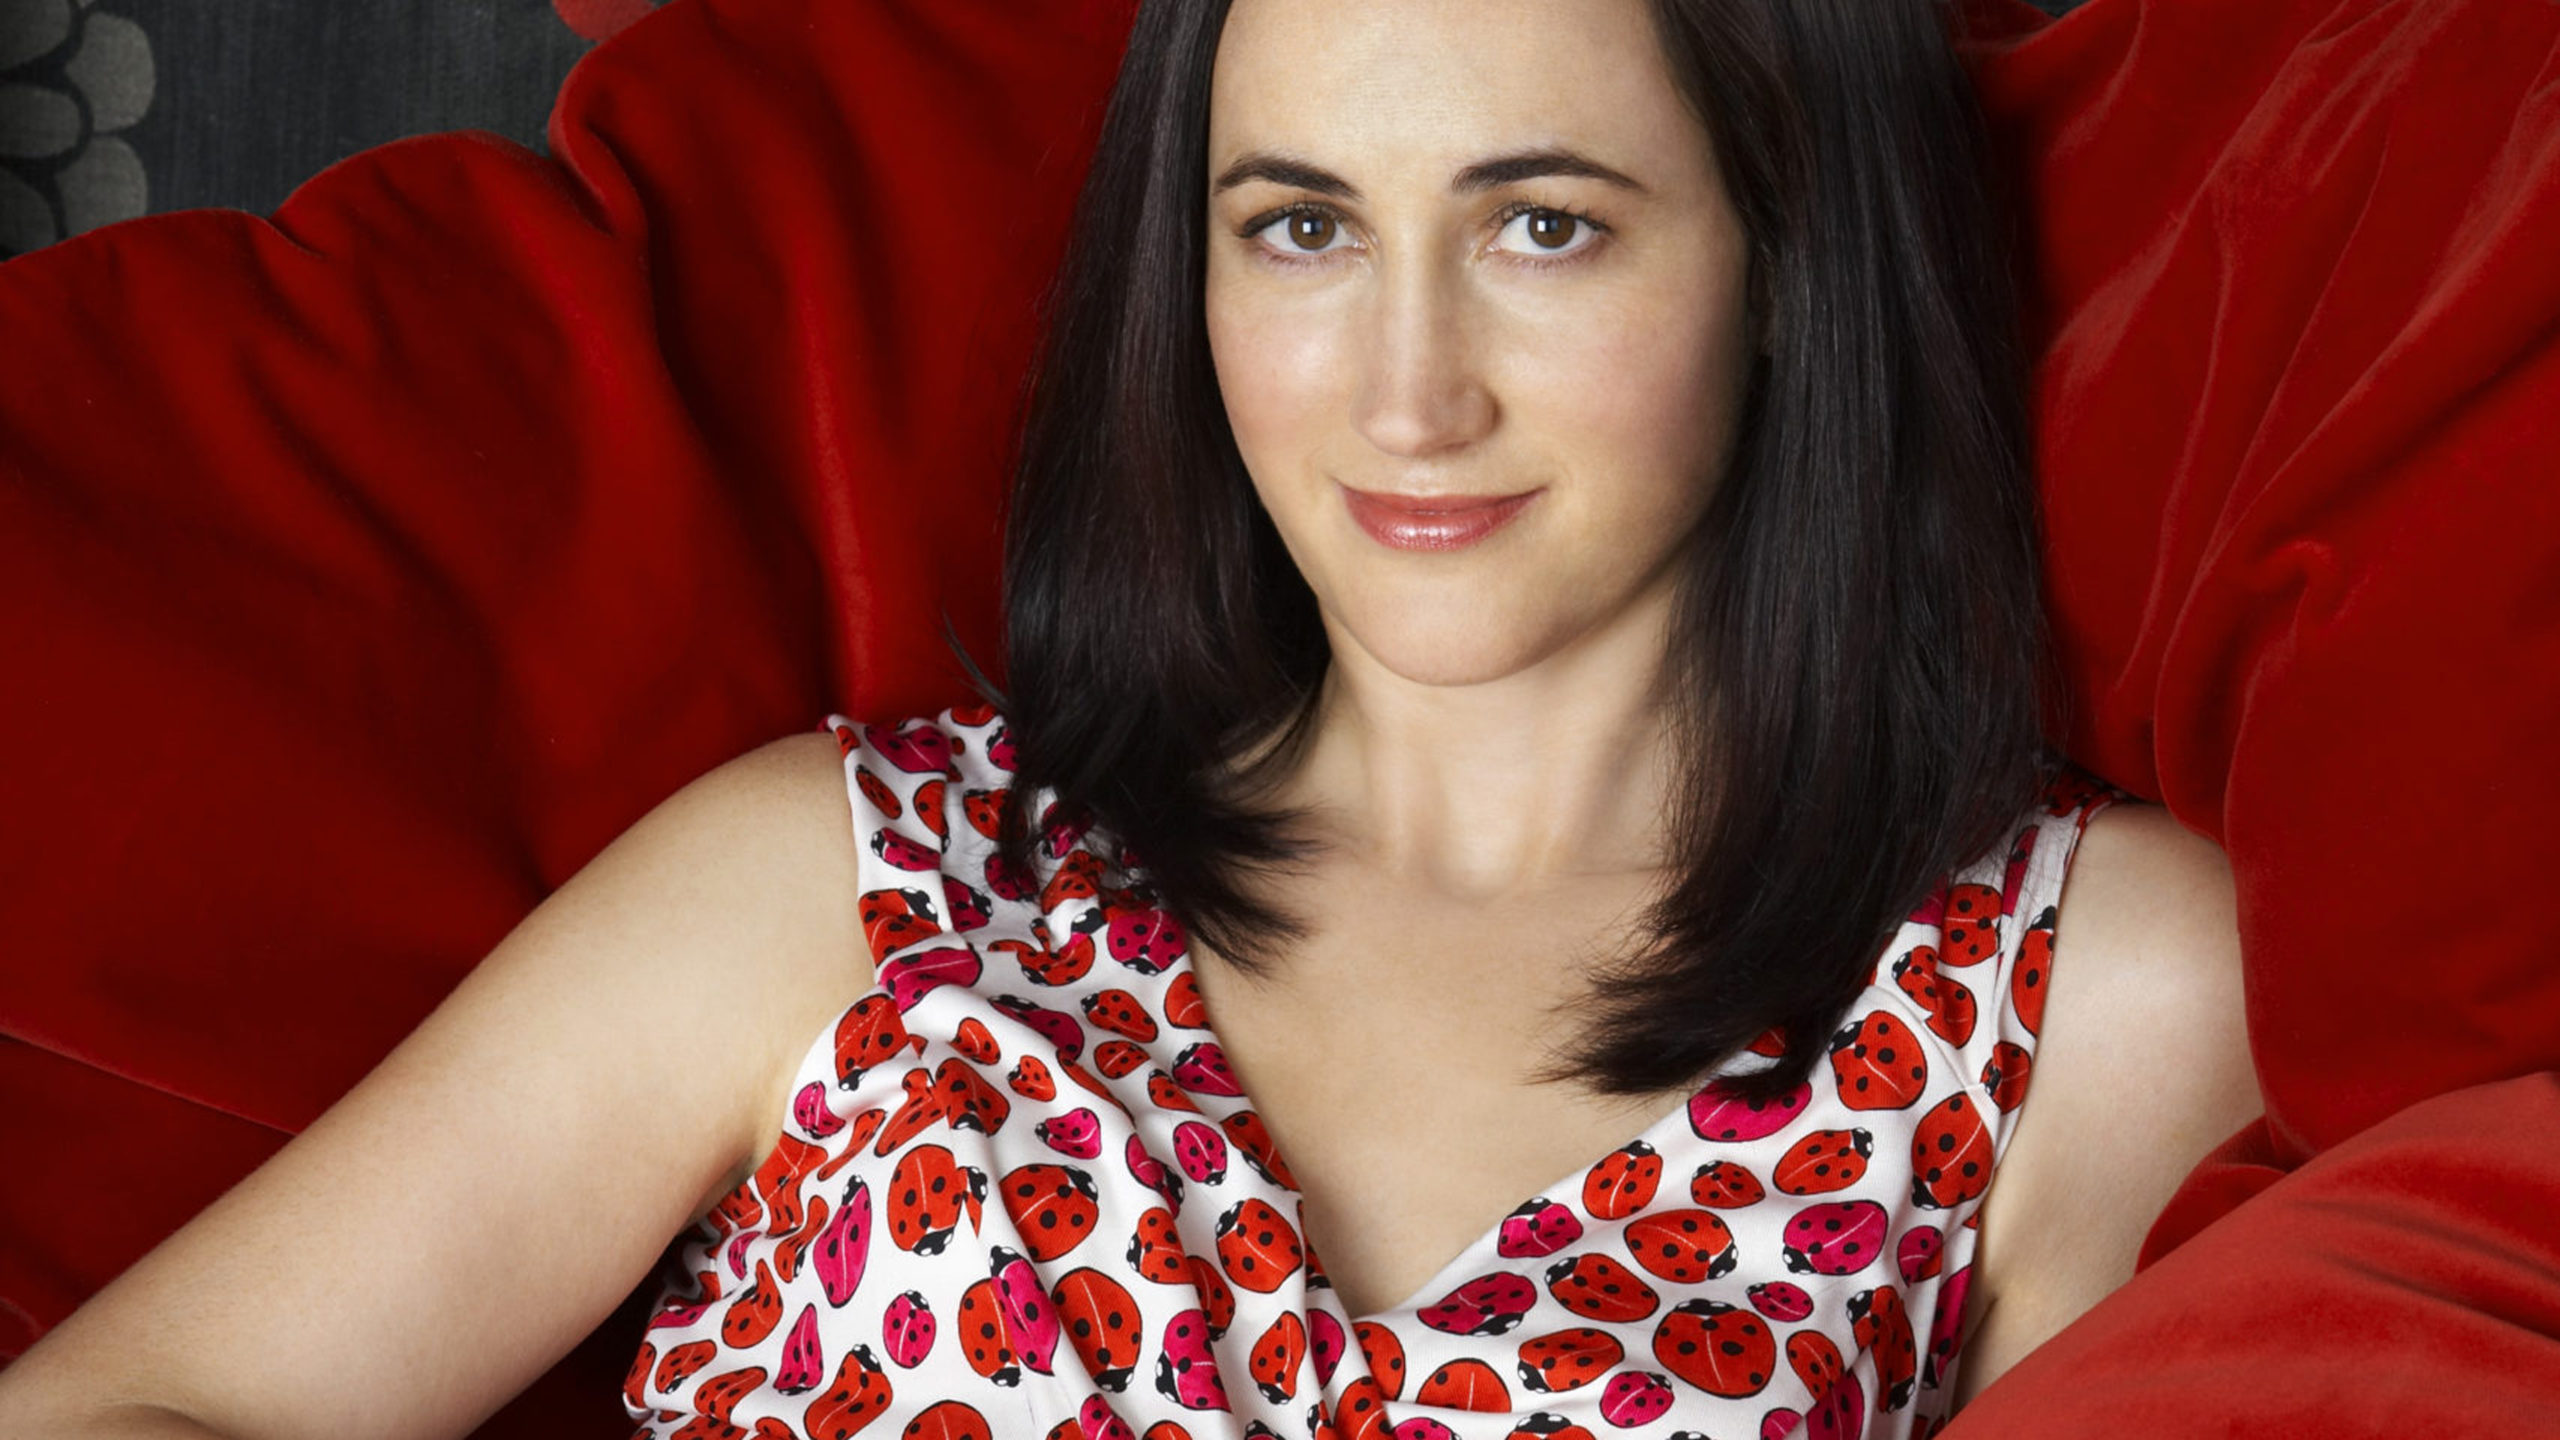 Sophie kinsella books are here to stay